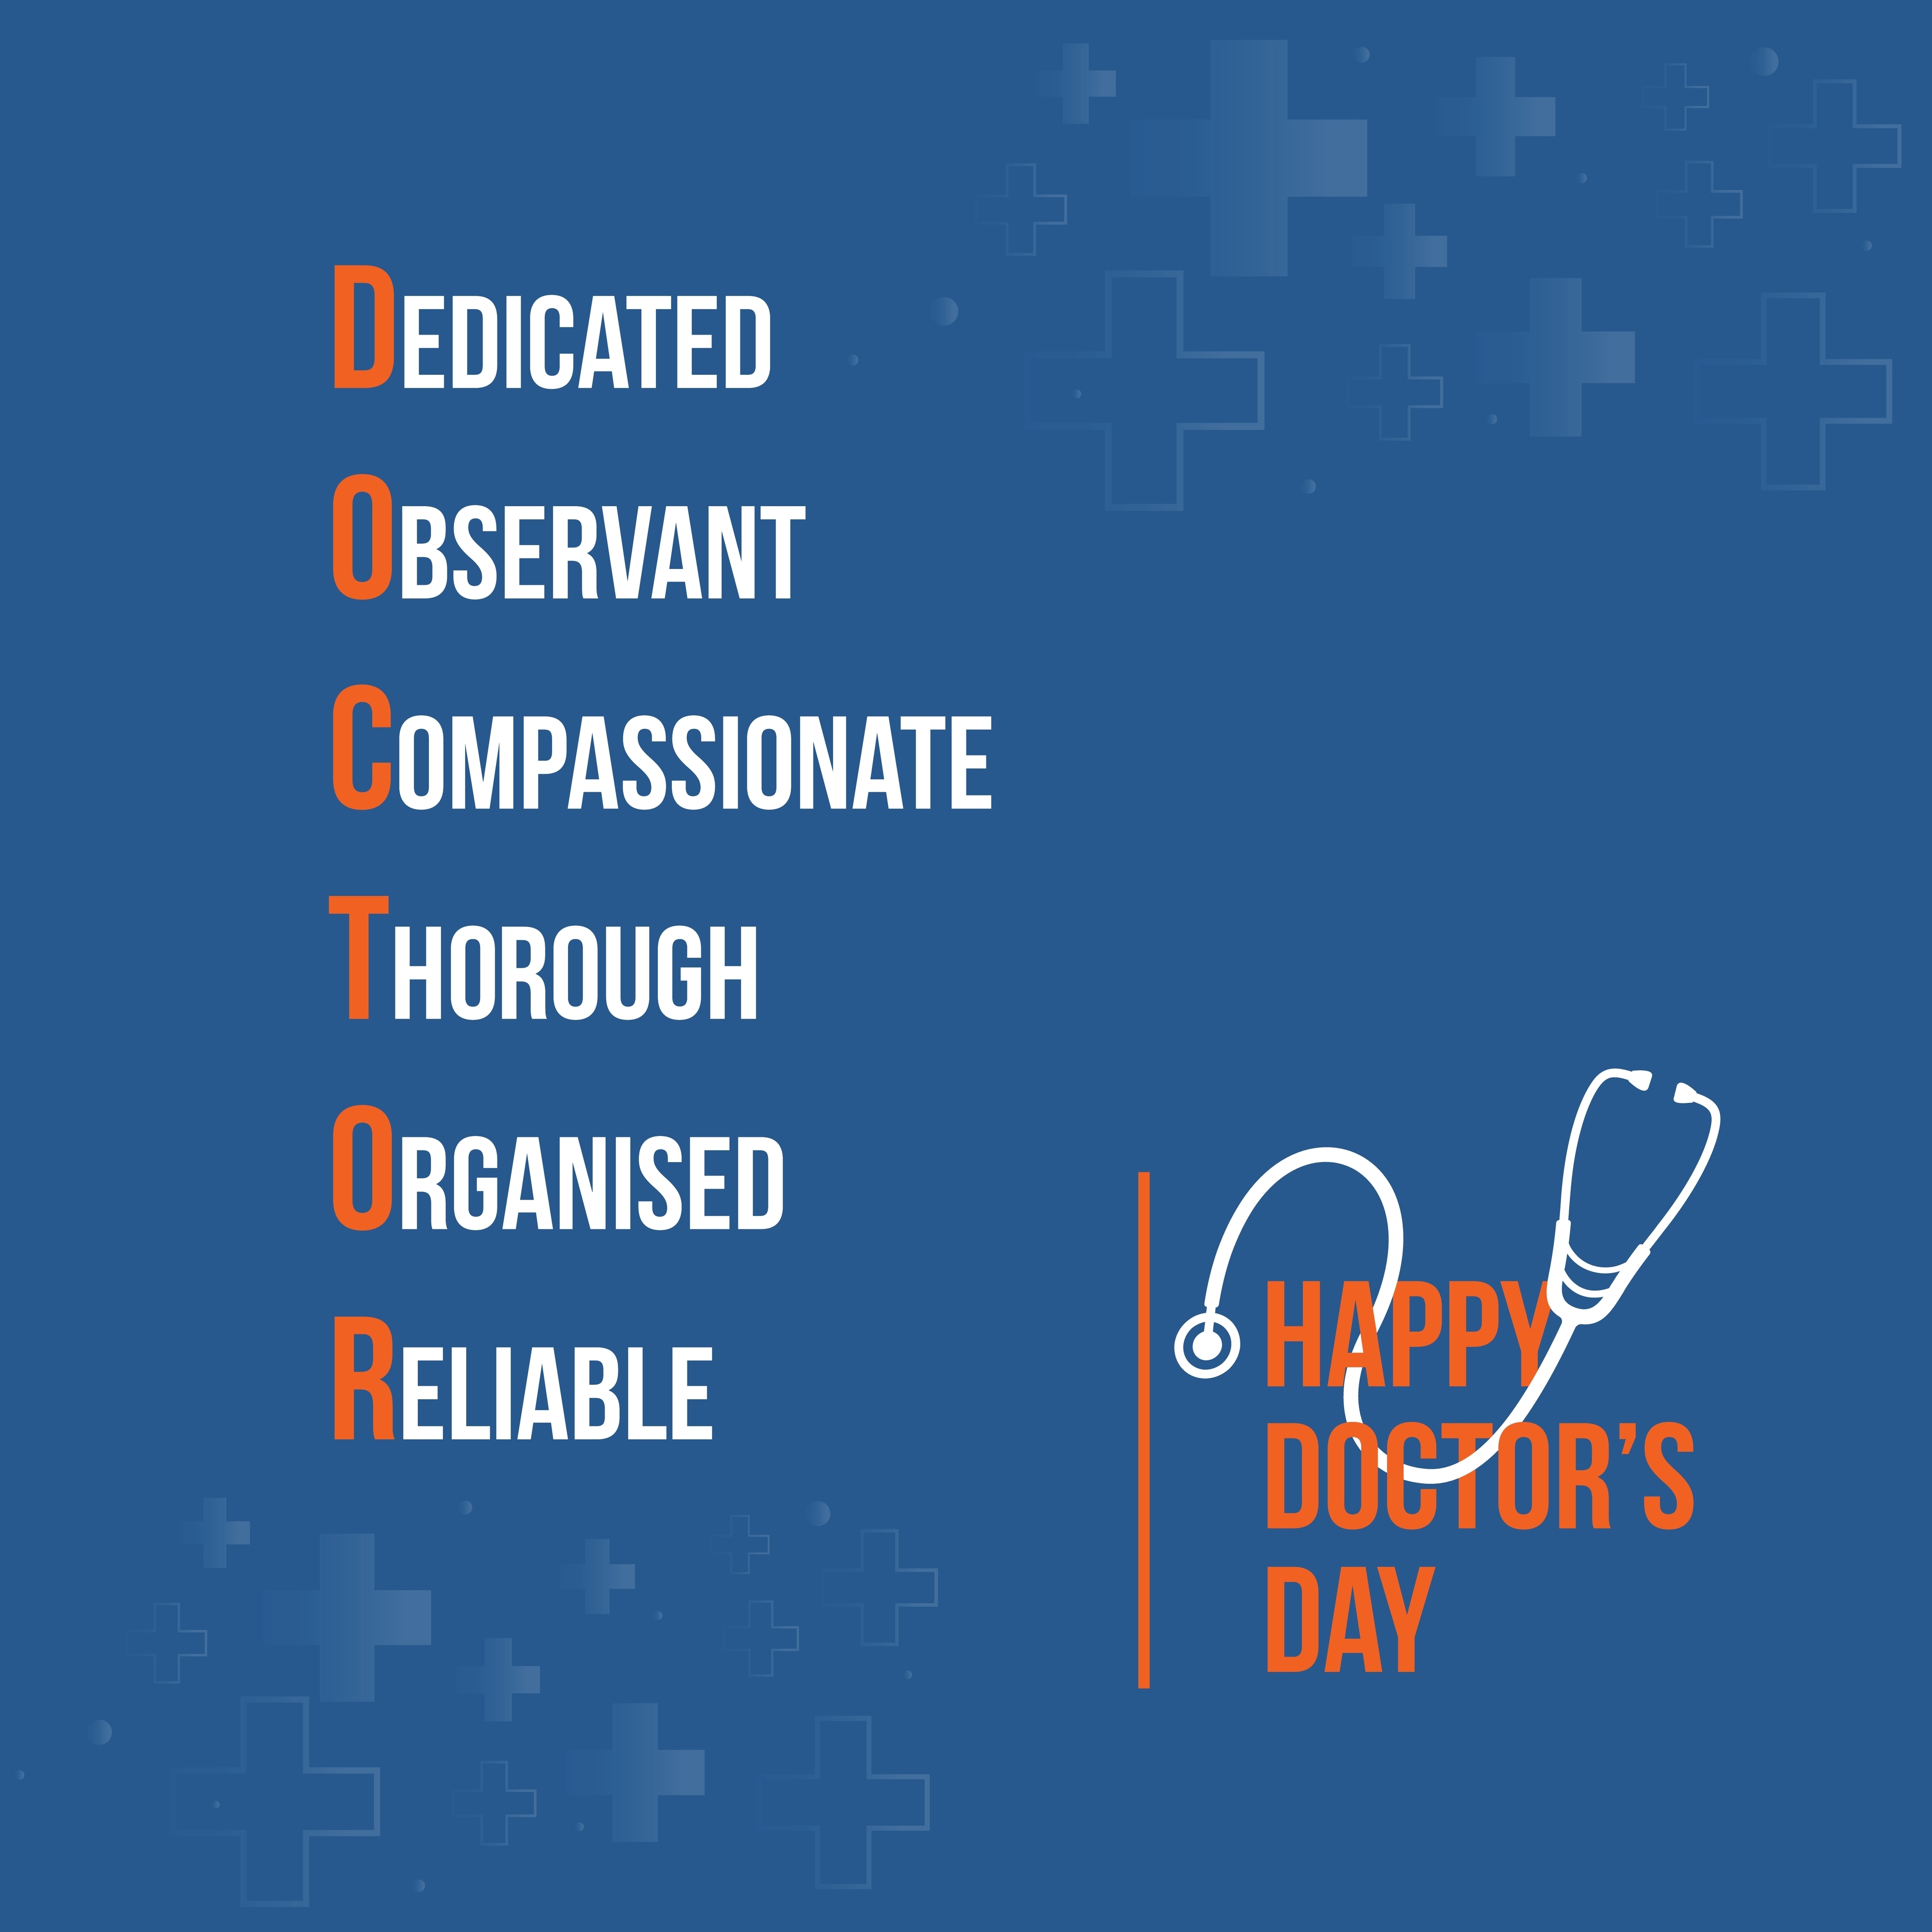 Happy Doctors Day Wishes Messages And Images 2023 | Images and Photos ...